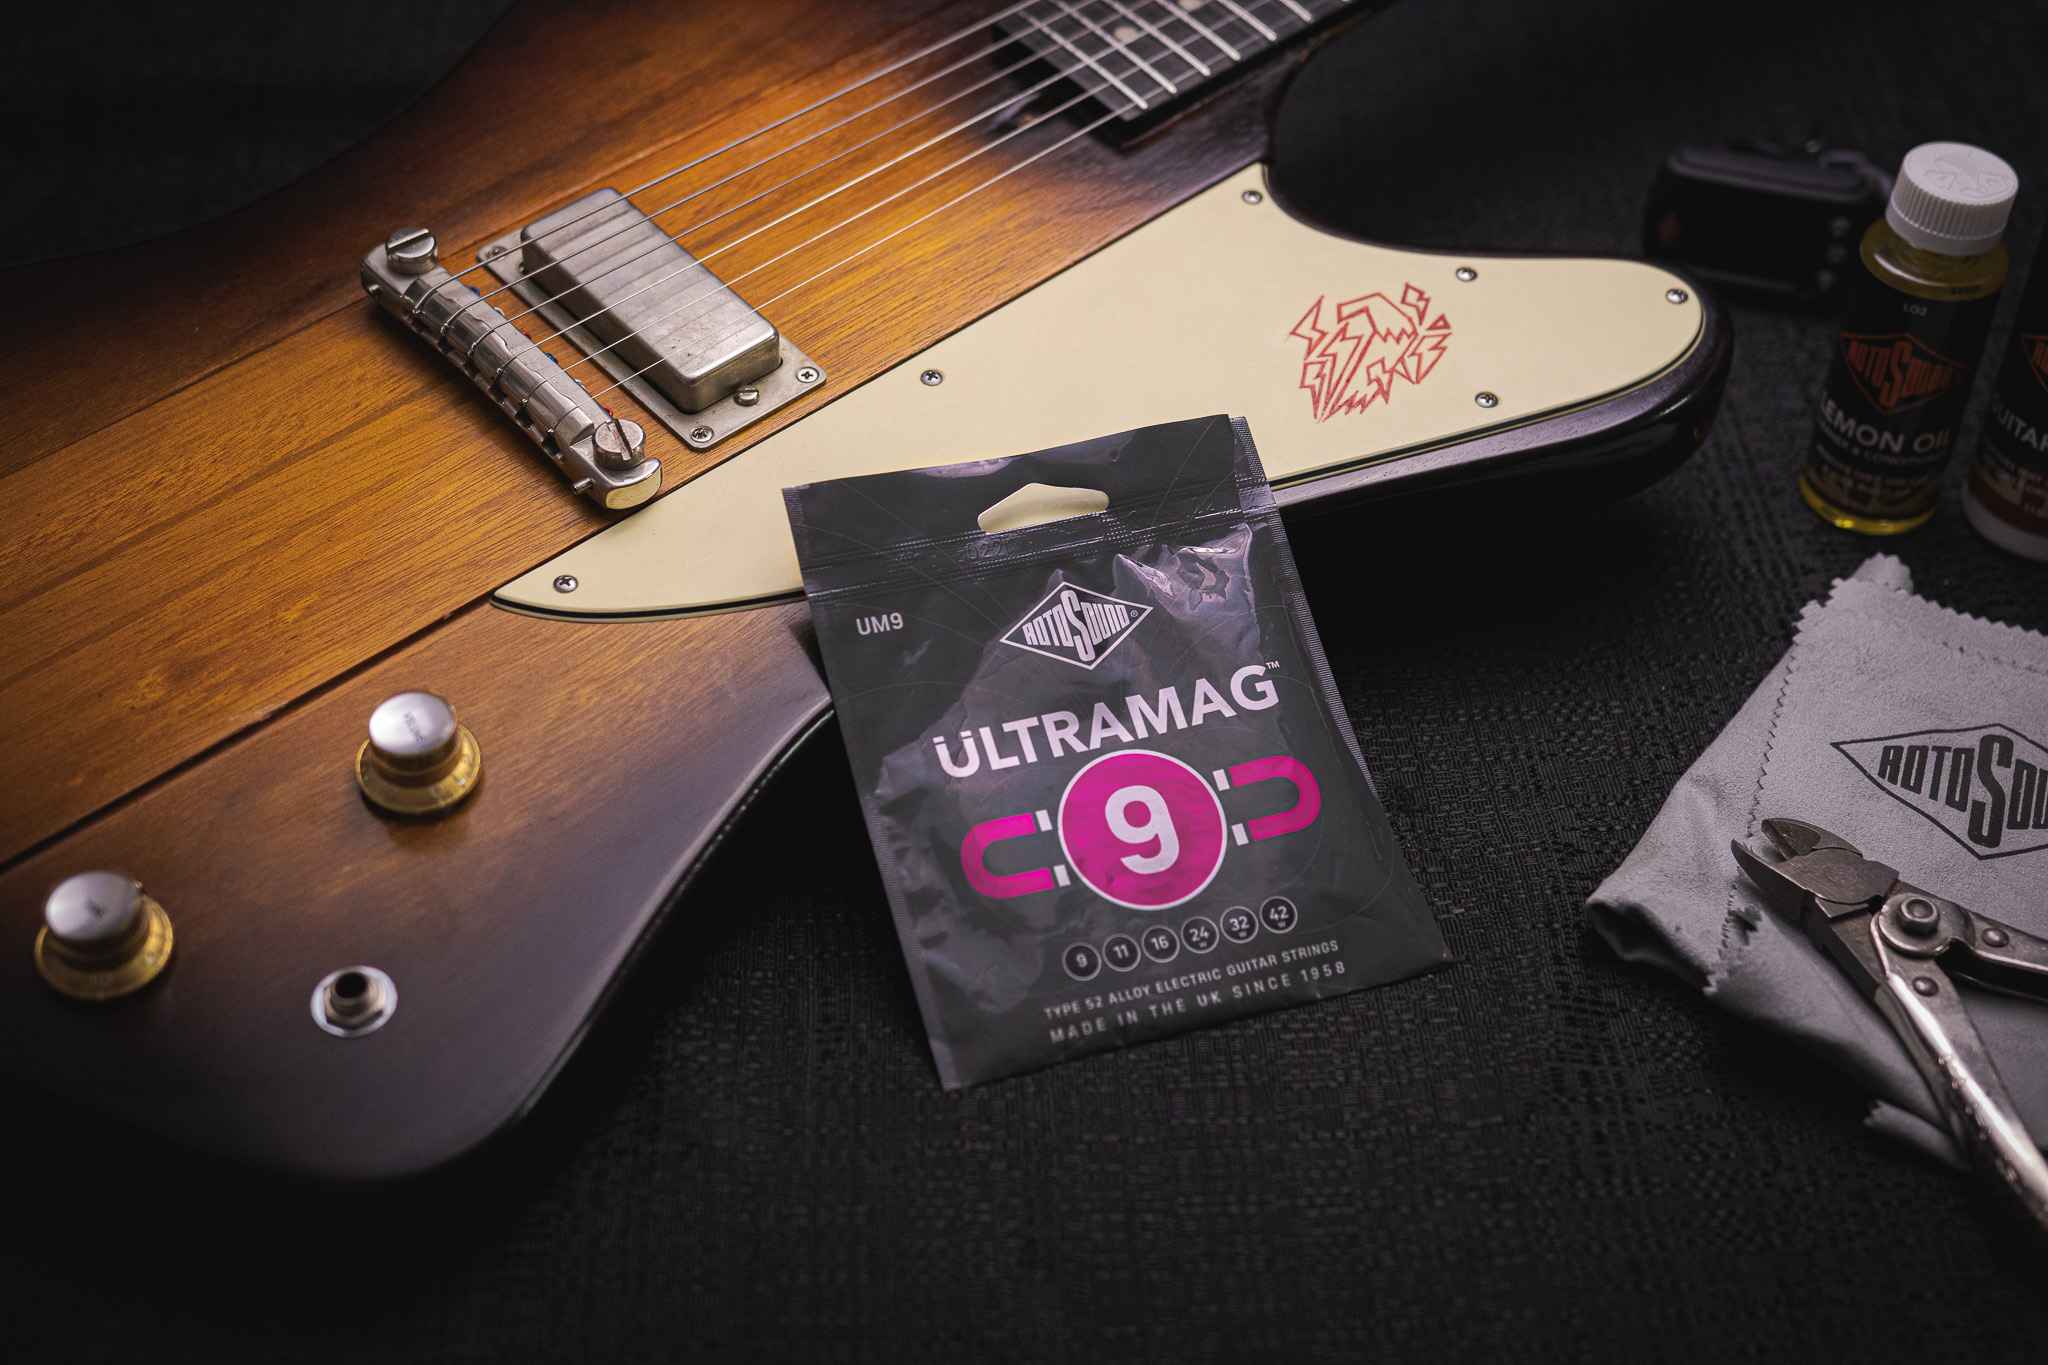 All about Rotosound Ultramag strings • Rotosound Music Strings